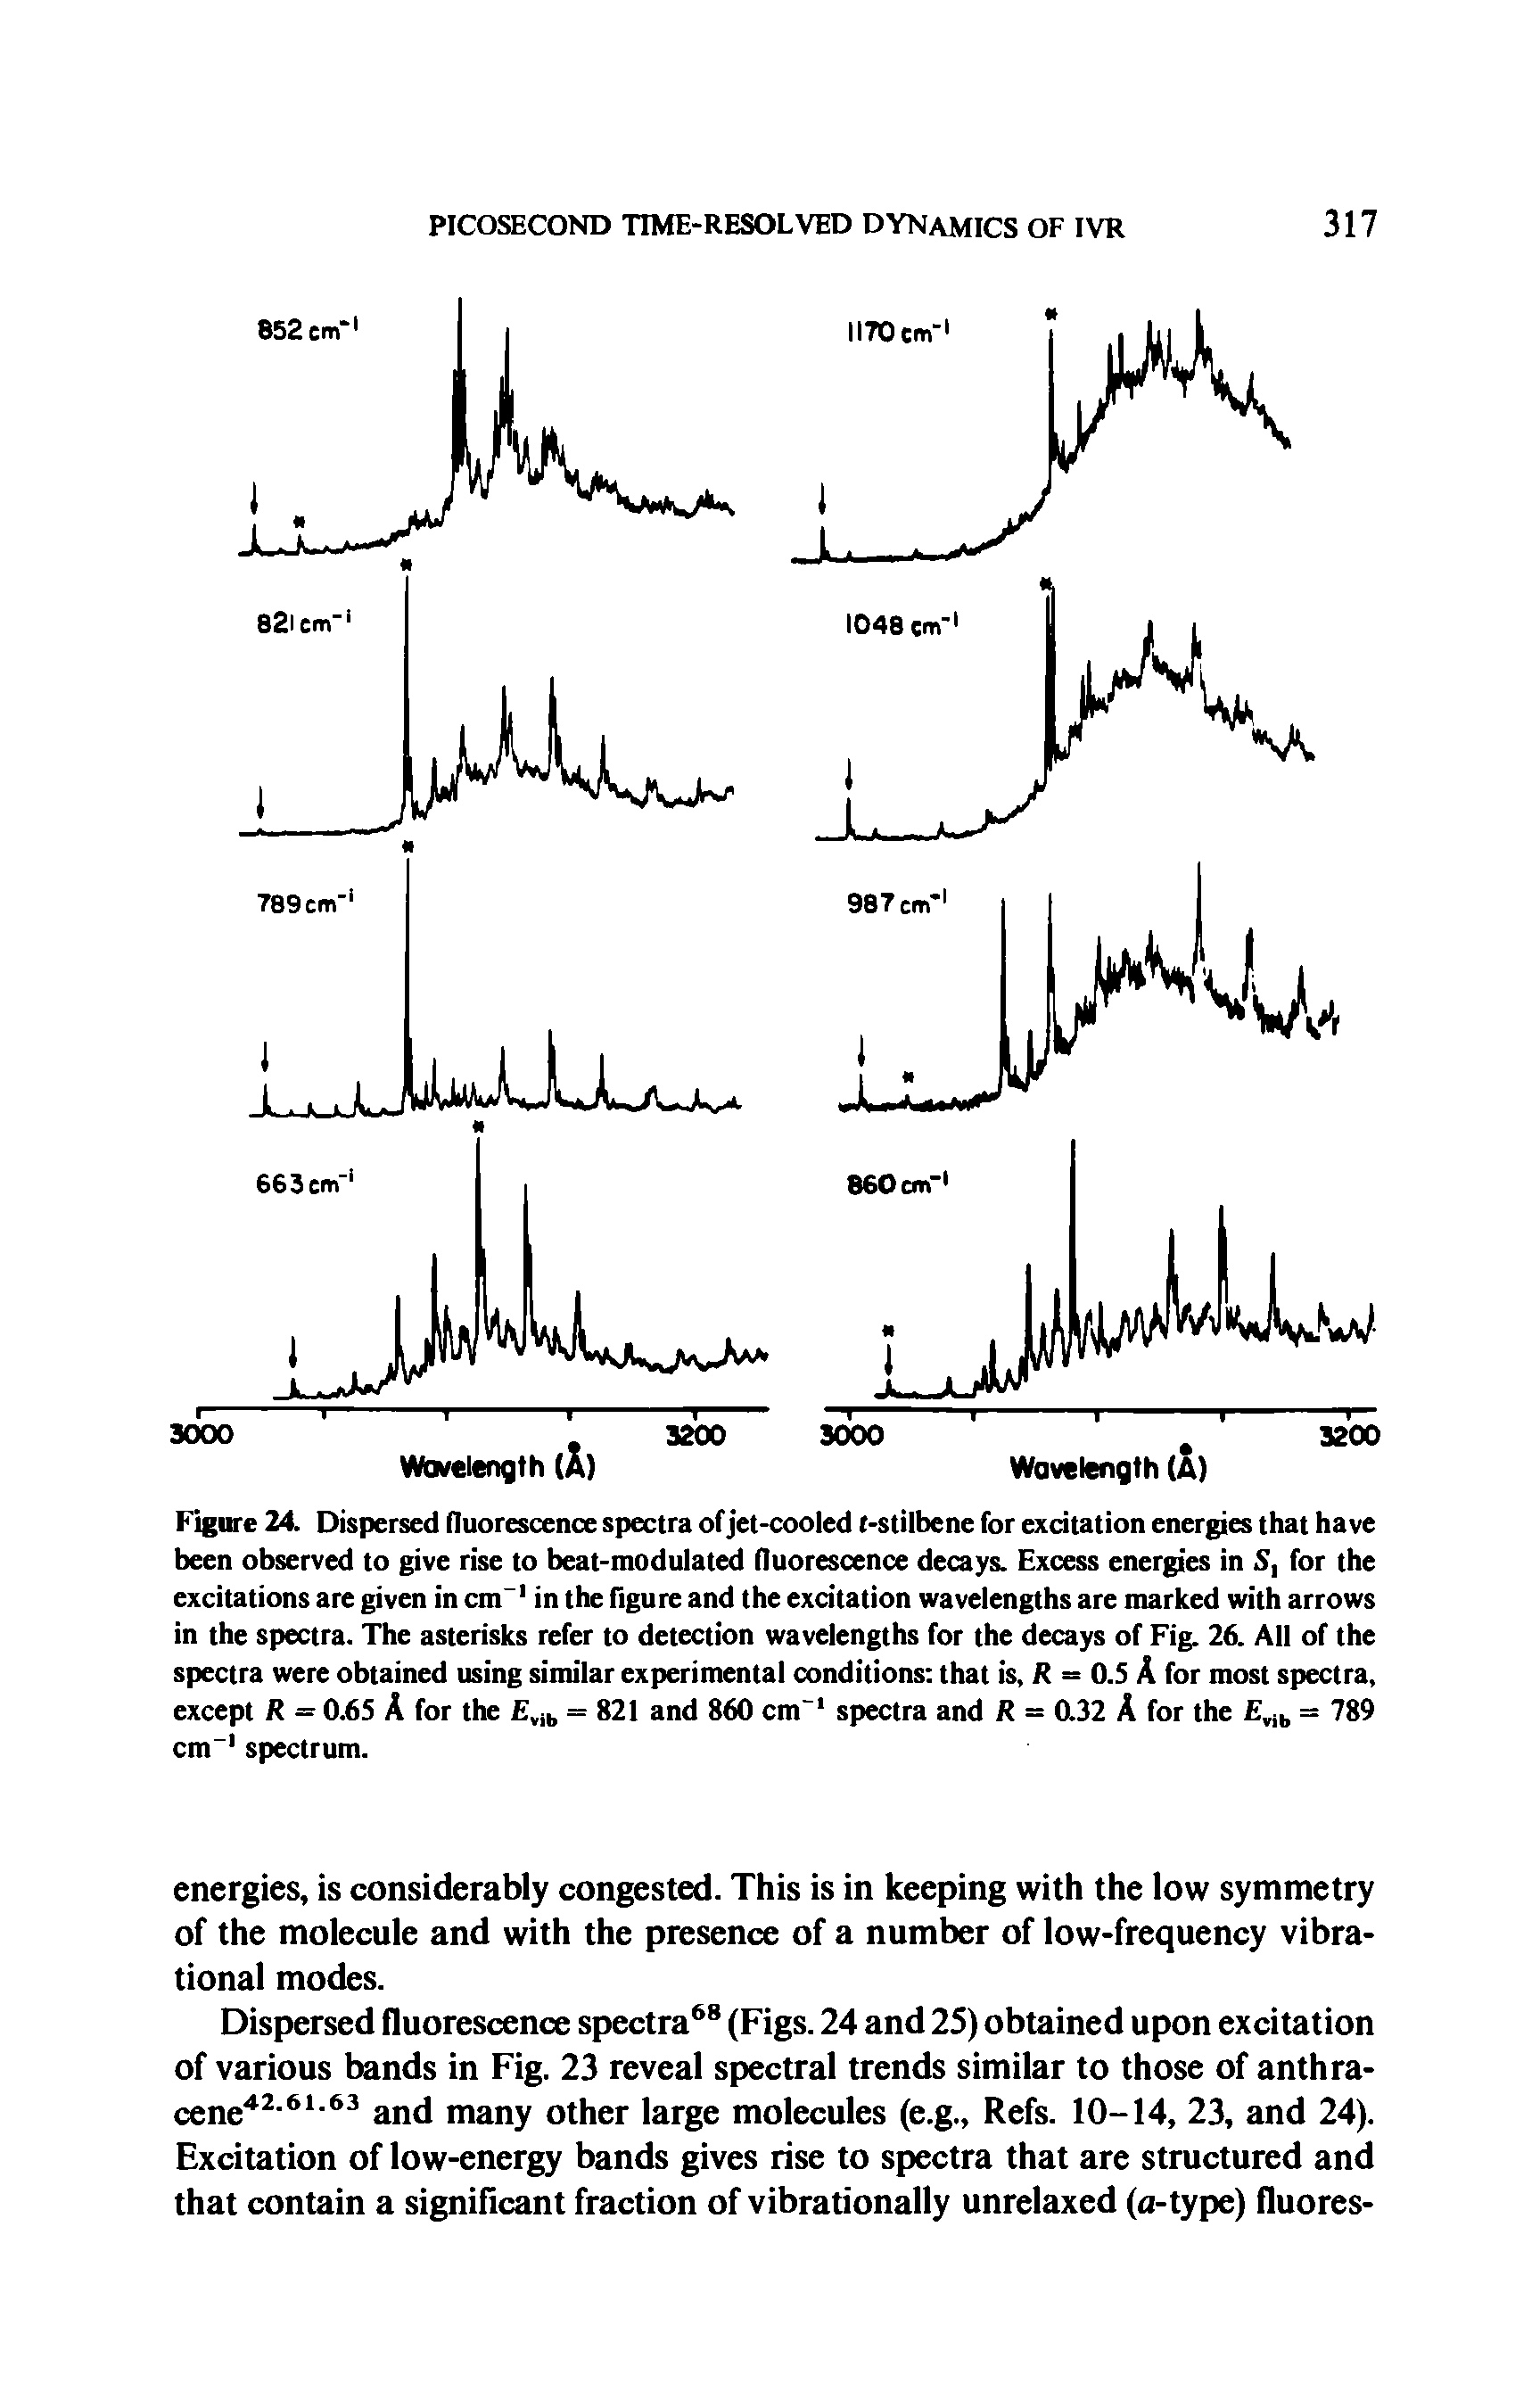 Figure 24. Dispersed fluorescence spectra of jet-cooled t-stilbene for excitation energies that have been observed to give rise to beat-modulated fluorescence decays. Excess energies in S, for the excitations are given in cm-1 in the figure and the excitation wavelengths are marked with arrows in the spectra. The asterisks refer to detection wavelengths for the decays of Fig. 26. All of the spectra were obtained using similar experimental conditions that is, R = 0.5 A for most spectra, except R = 0.6S A for the vib = 821 and 860 cm-1 spectra and R = 0.32 A for the vib = 789 cm-1 spectrum.